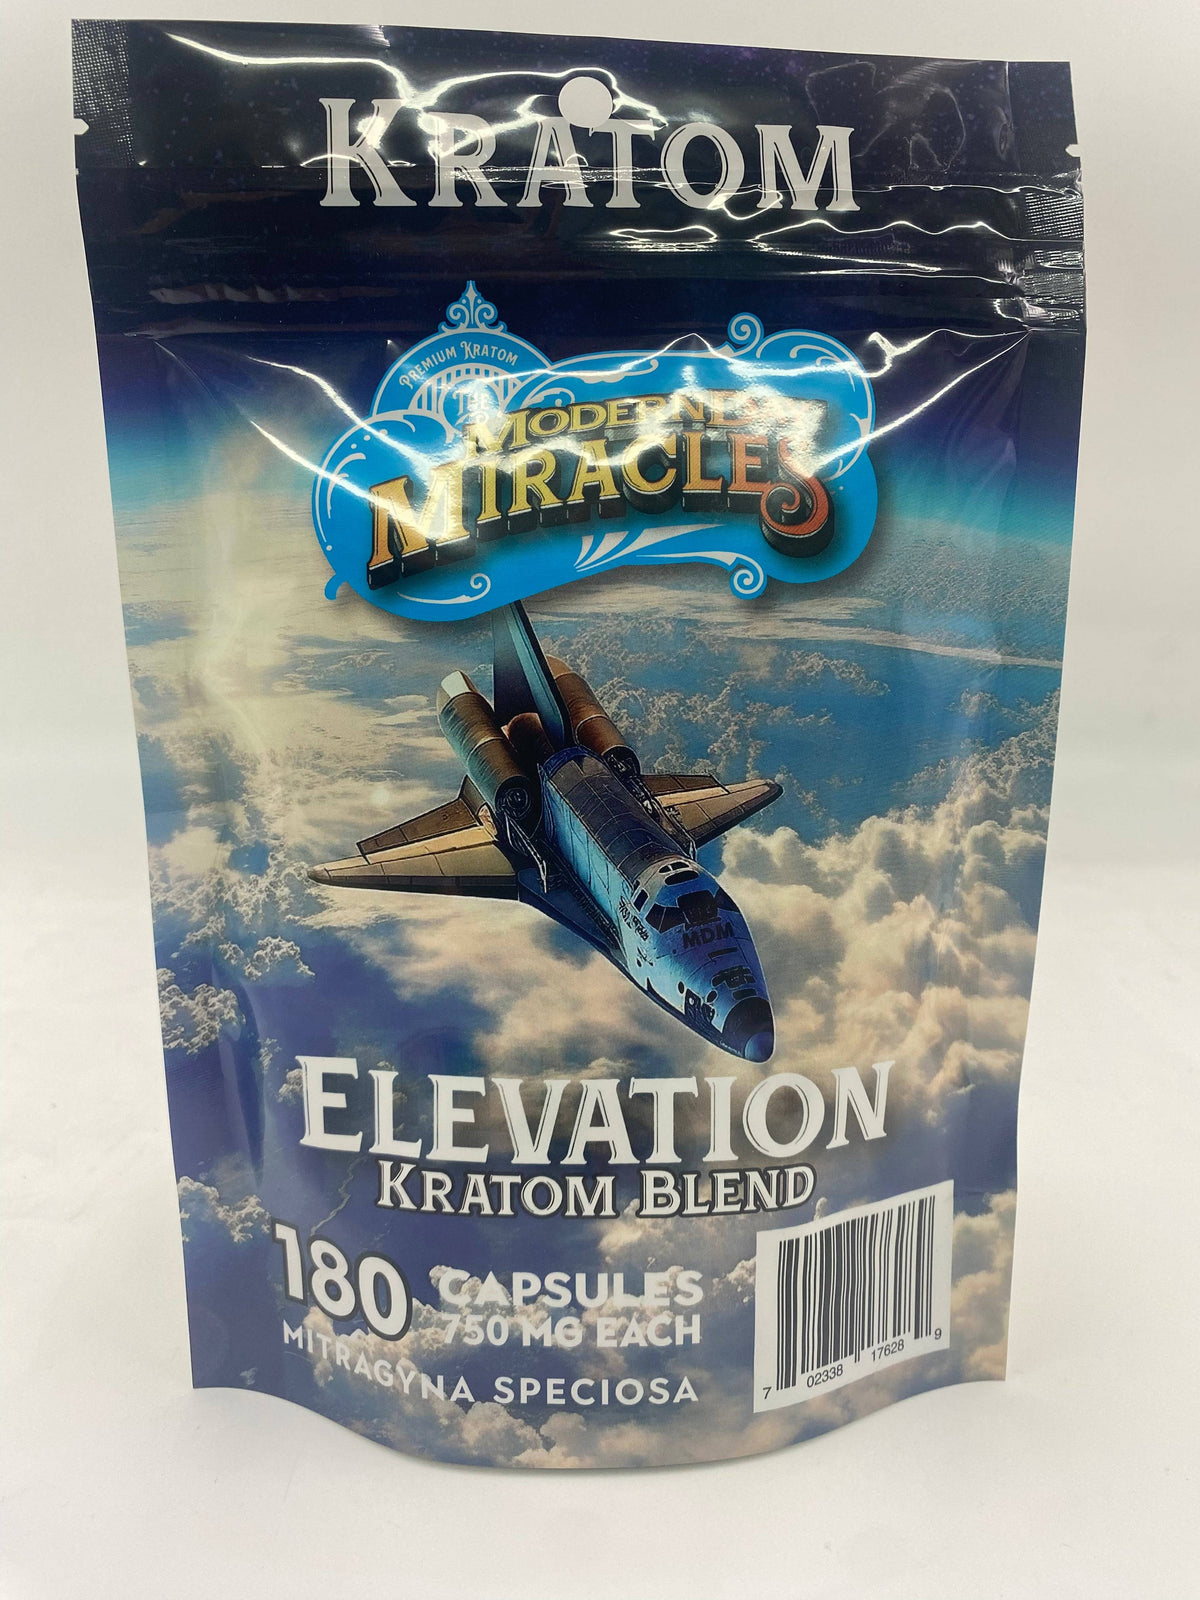 Modern Day Miracles Space Blends- Elevation White Kratom Cambodia Blend 180ct Capsules